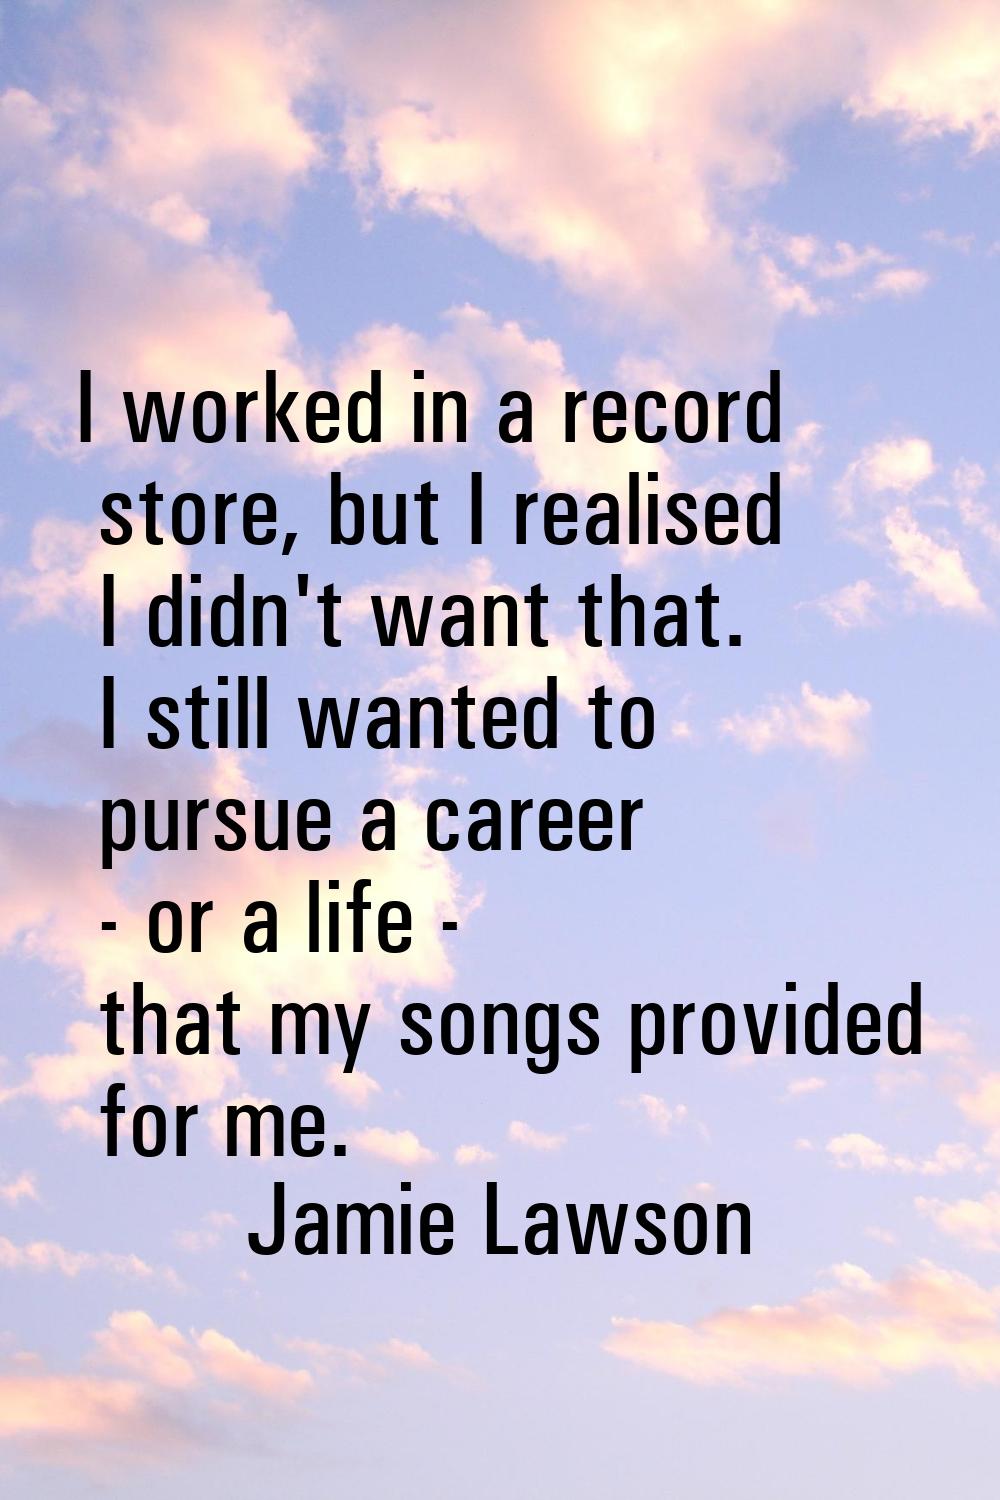 I worked in a record store, but I realised I didn't want that. I still wanted to pursue a career - 